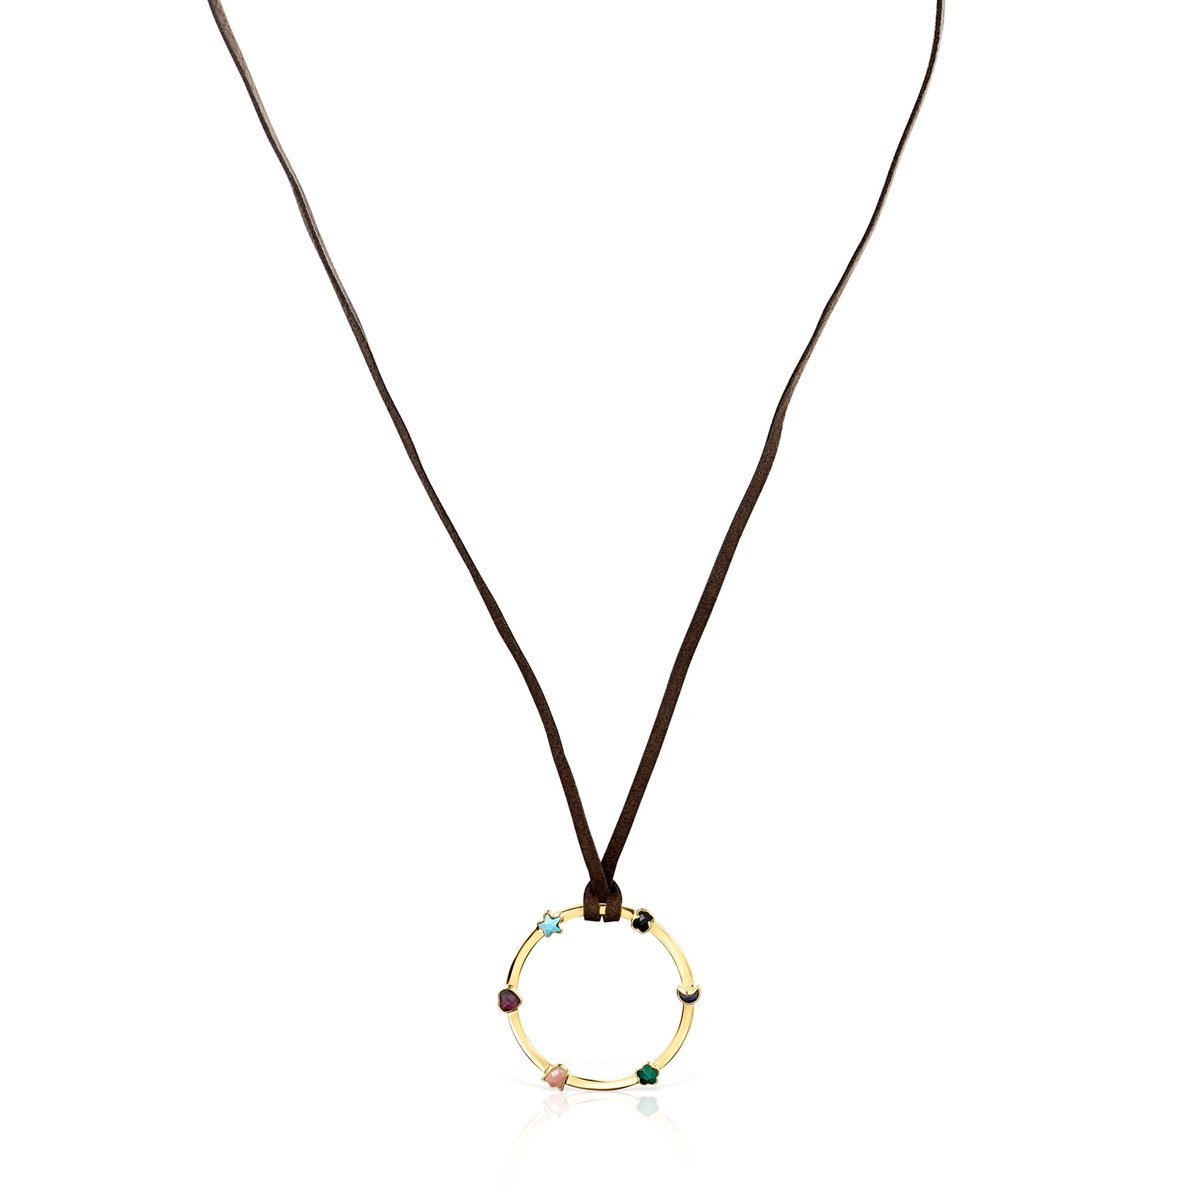 Tous Glory Necklace in Gold Vermeil with Gemstones 918594510 –